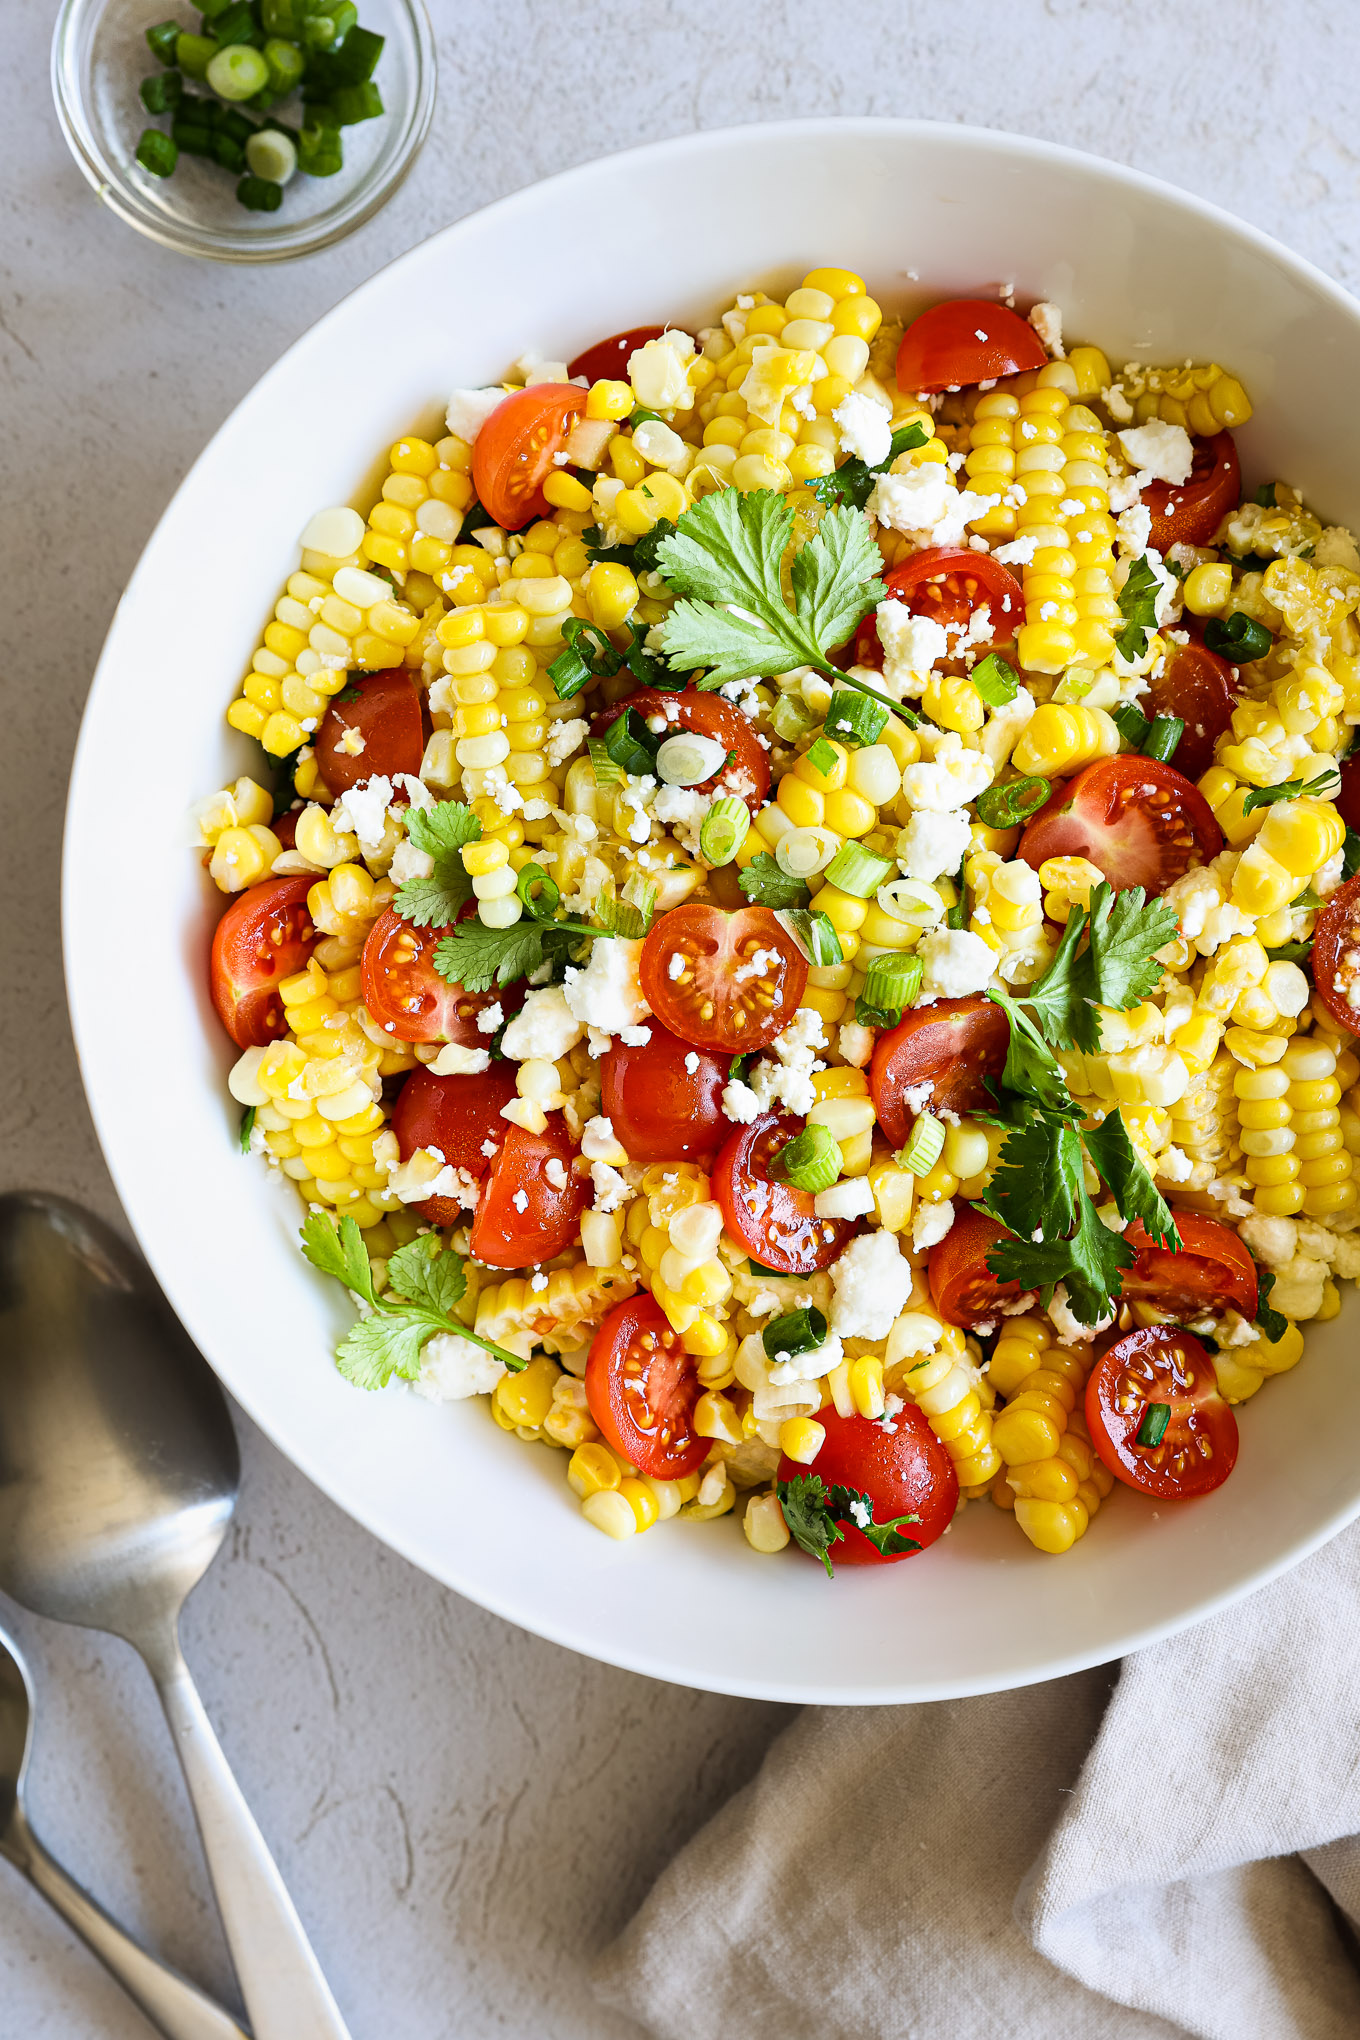 corn salad with tomatoes, feta, and cilantro in a white bowl.